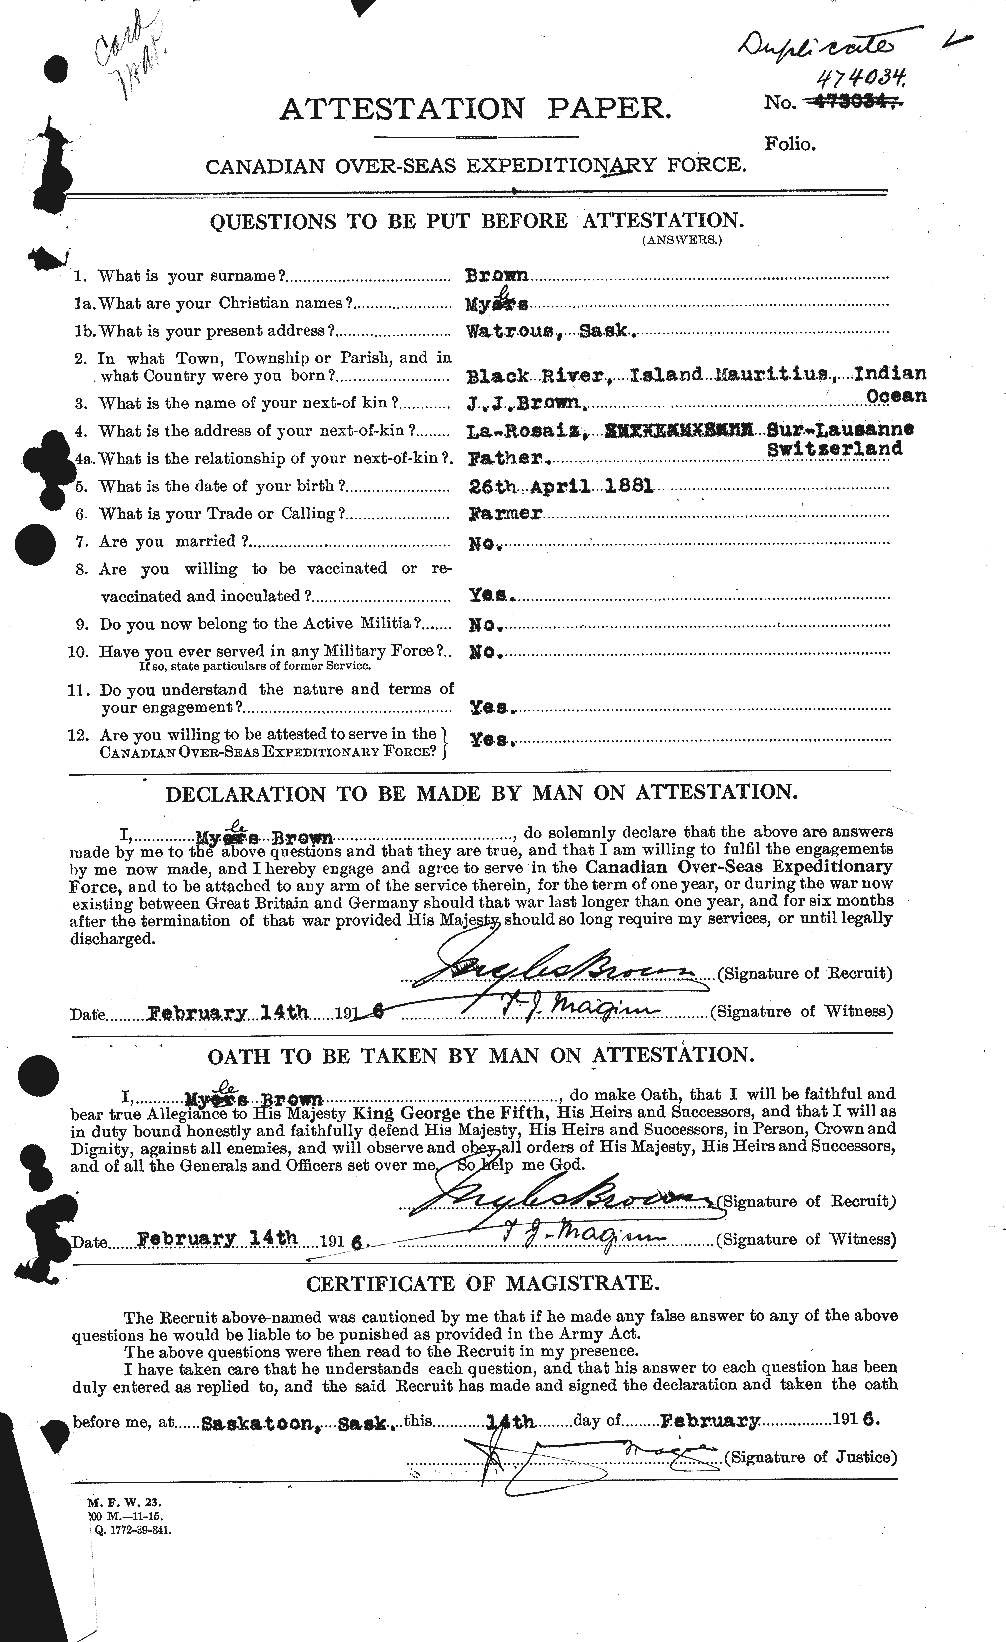 Personnel Records of the First World War - CEF 267082a